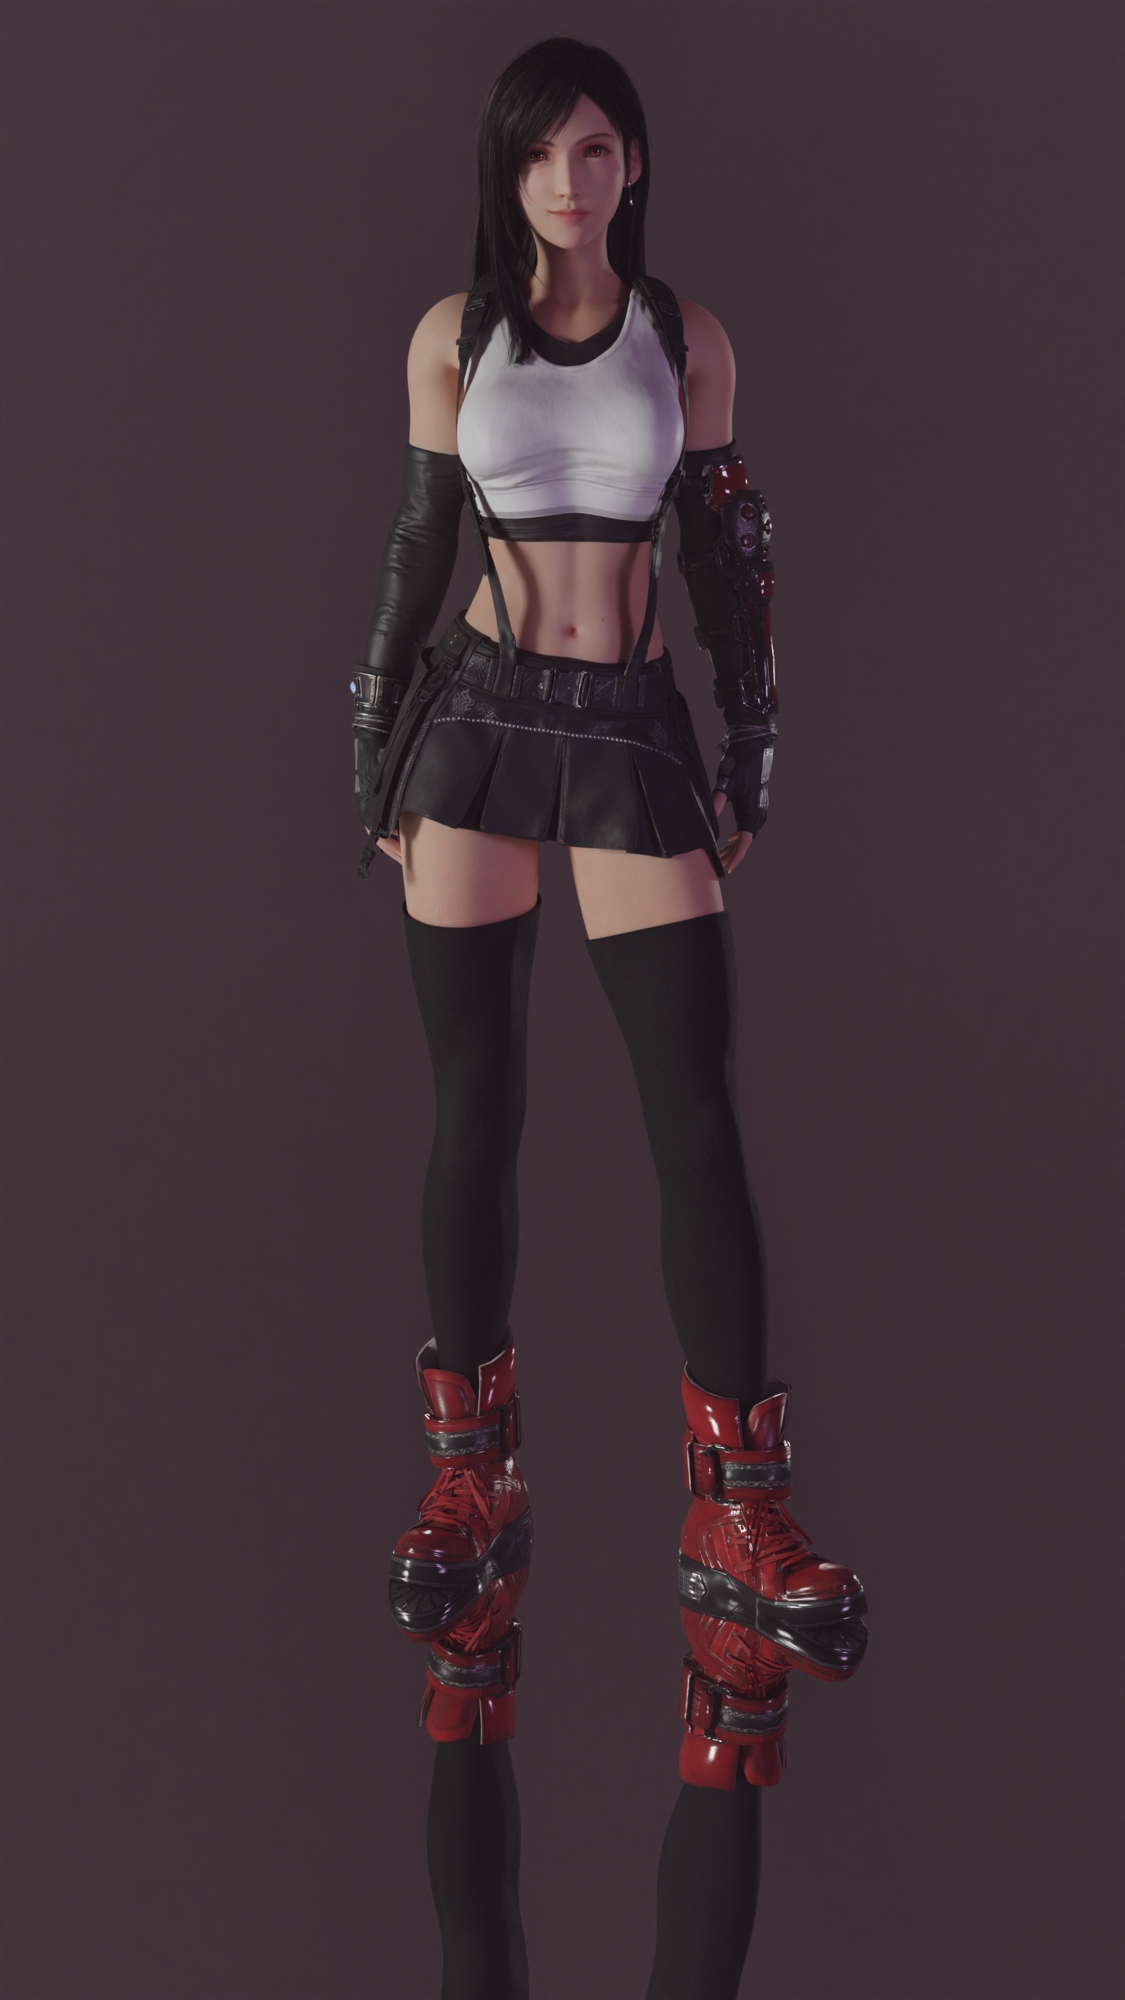 Tifa as a poster model and get some extra work Tifa Lockhart Final Fantasy Final Fantasy 7 Final Fantasy VII 